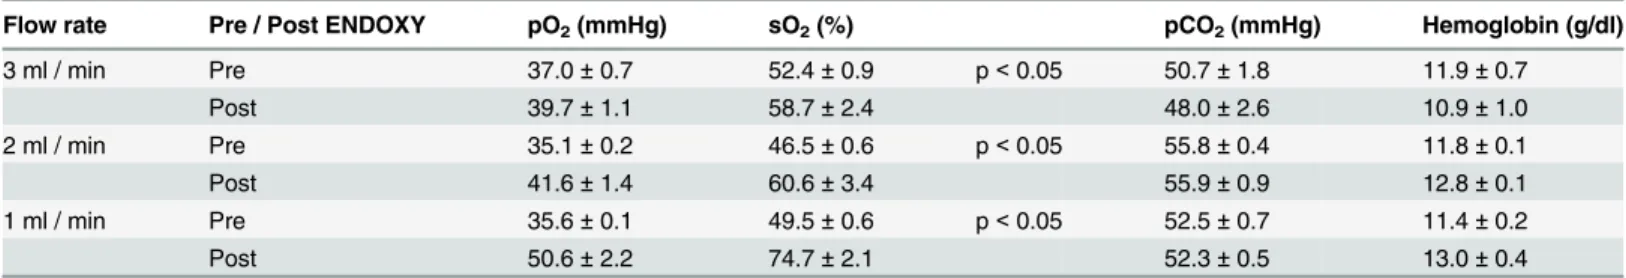 Table 7. Gas transfer measurement of coated Lumox ™ slide after redesign — blood gas analysis.